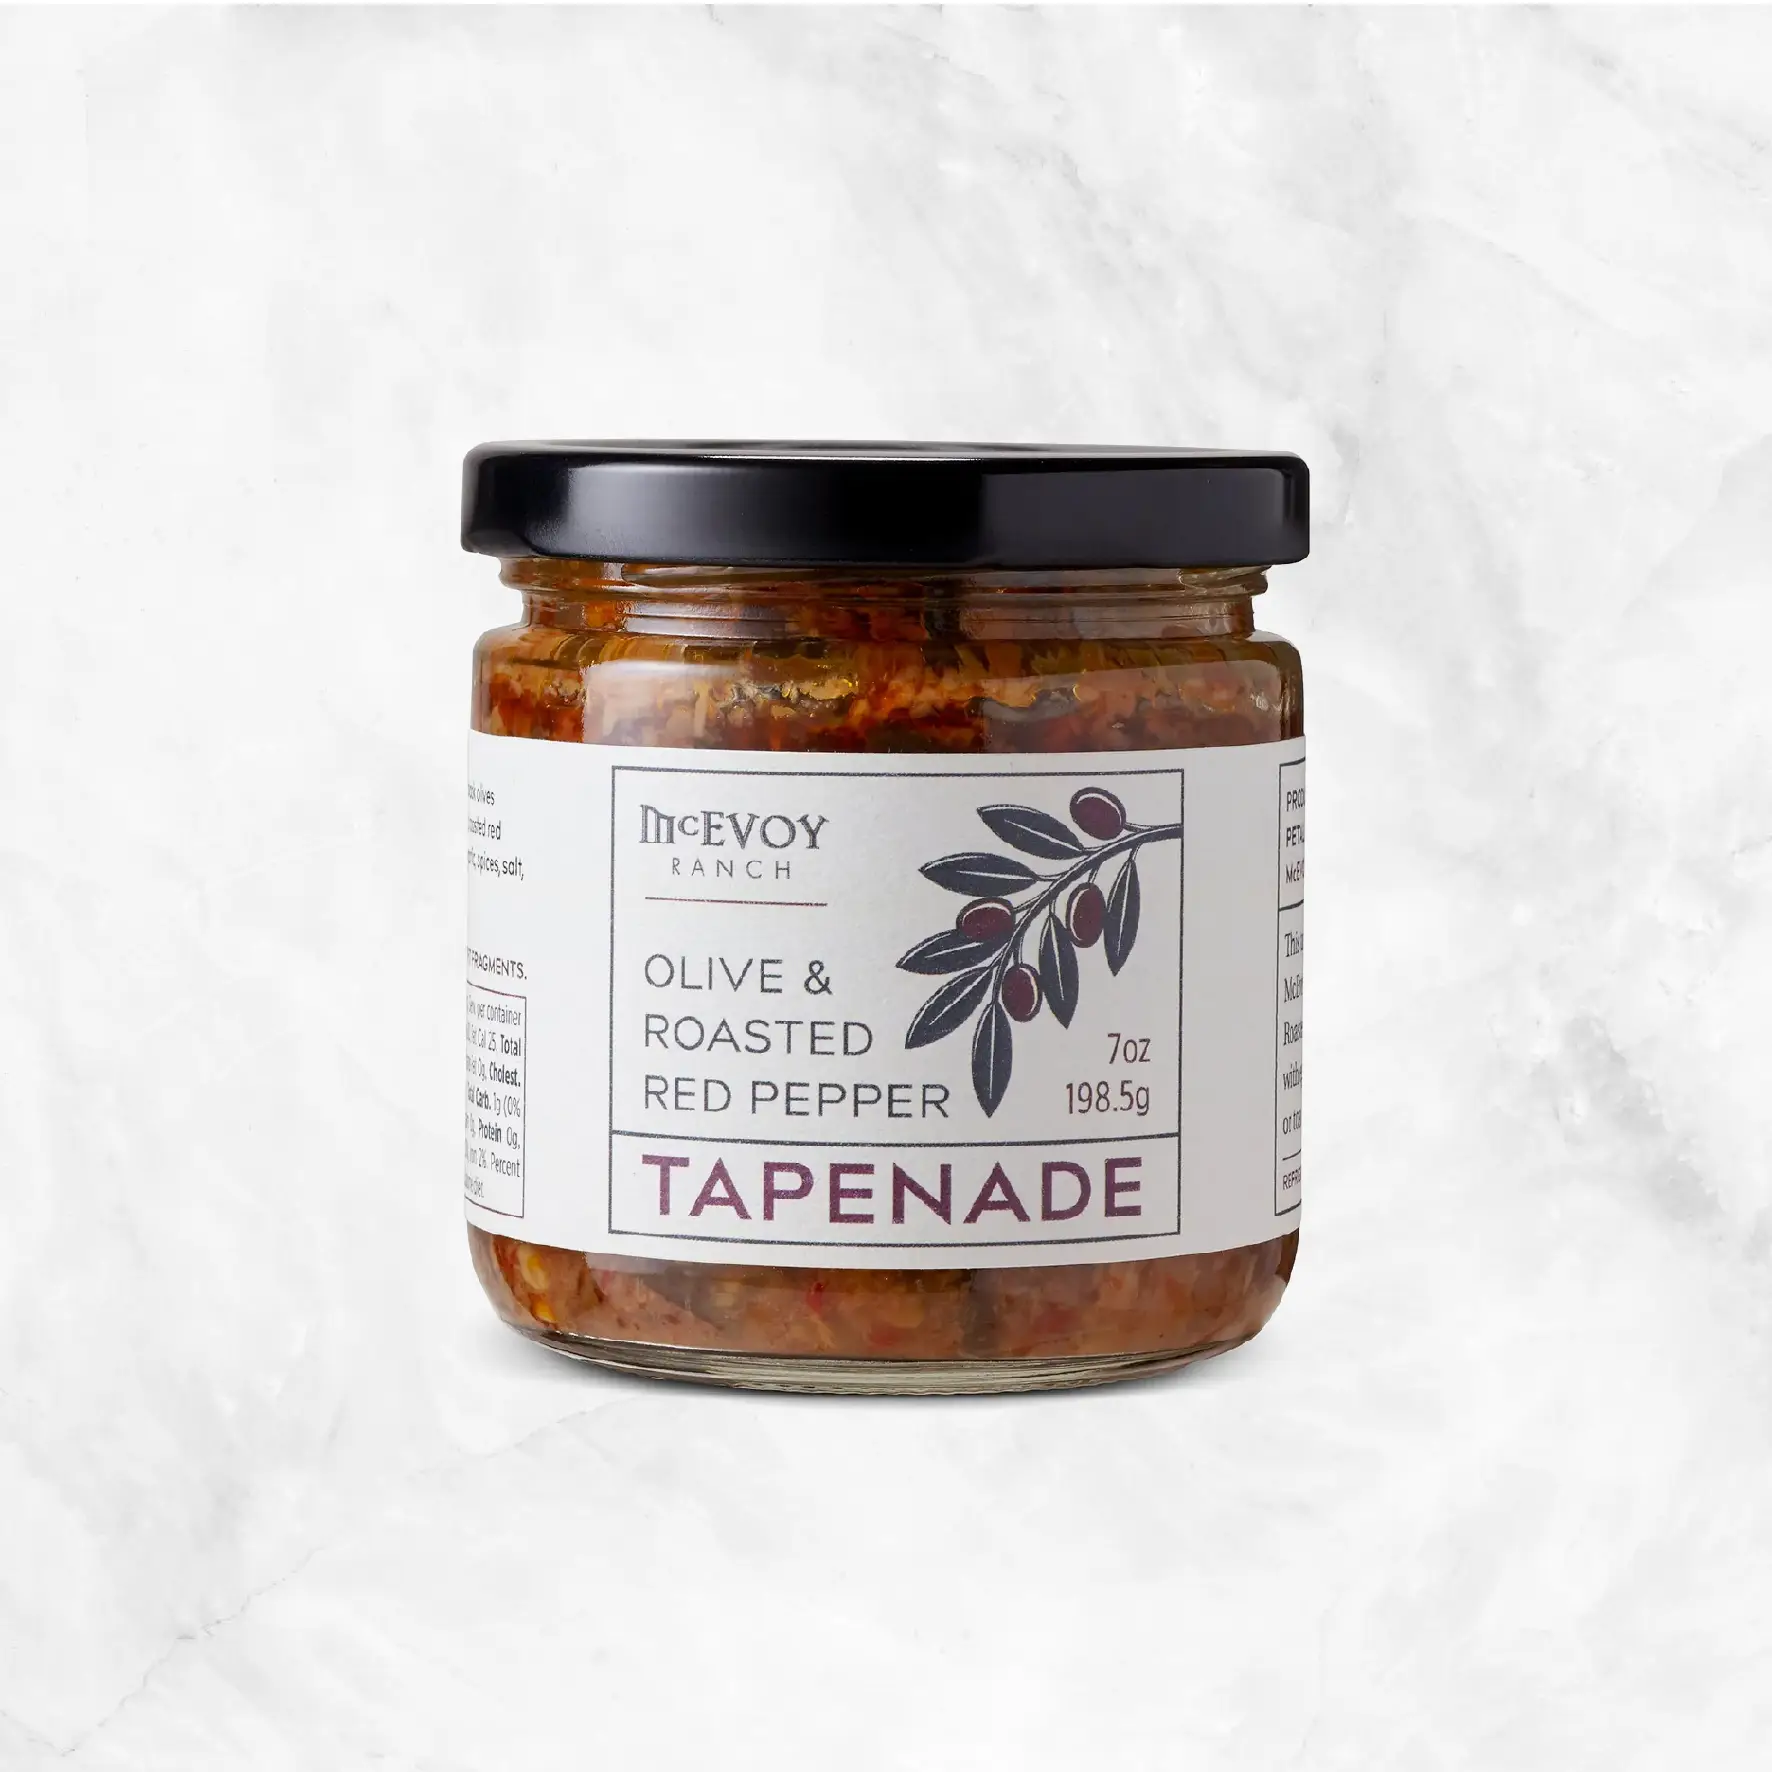 Olive & Roasted Red Pepper Tapenade Delivery